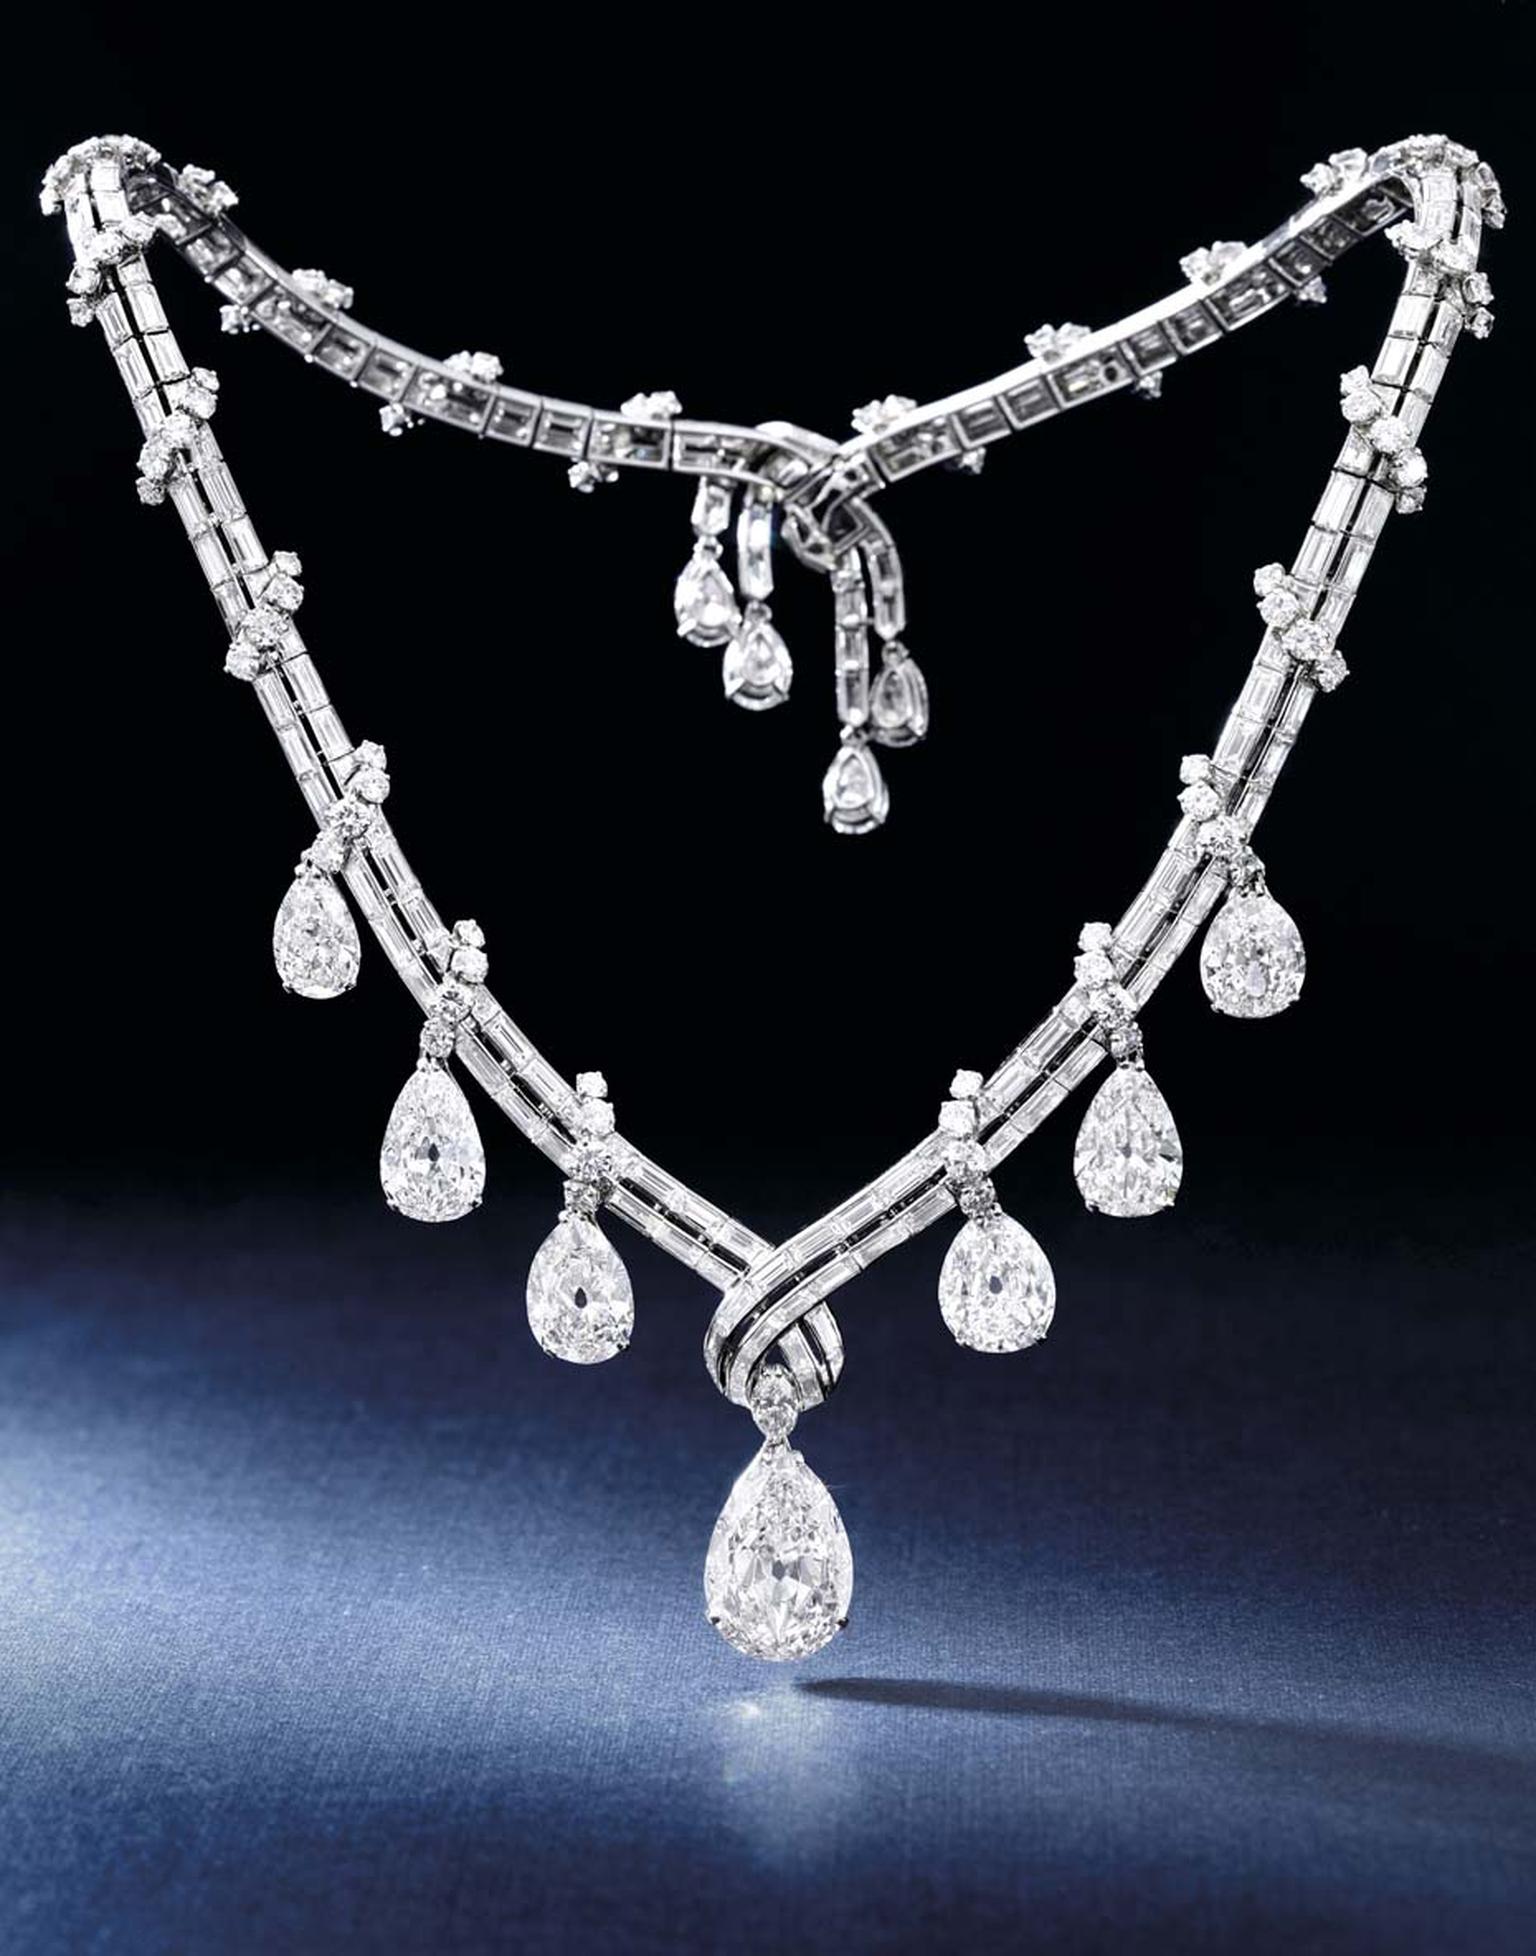 Bulgari jewellery diamond necklace, dating back to the 1950s, will go under the hammer at Sotheby’s Hong Kong Magnificent Jewels and Jadeite spring sale on 6 April.